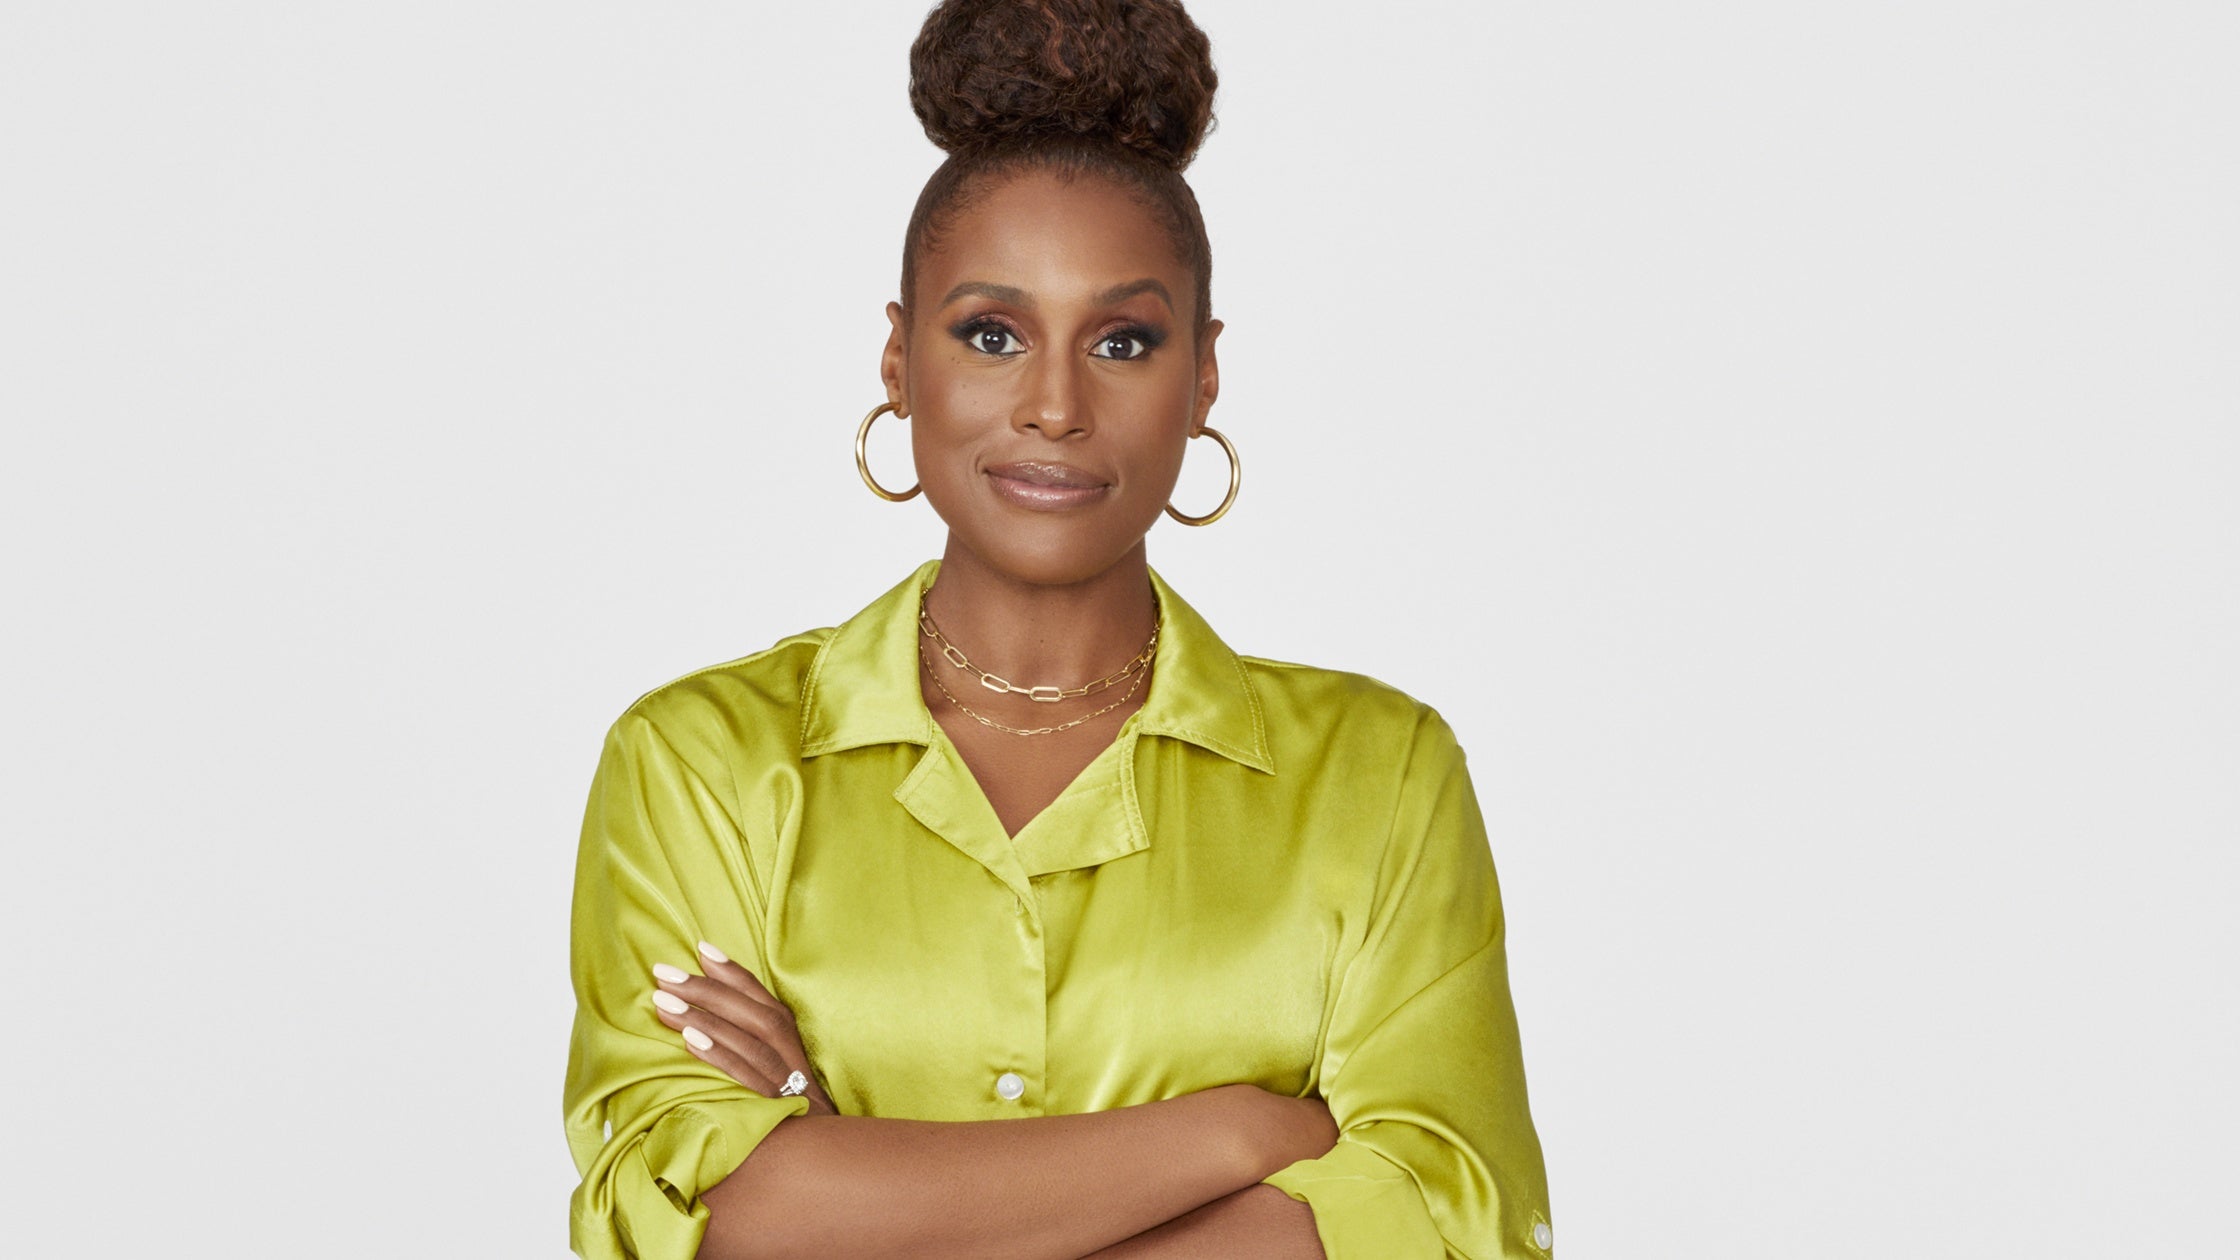 Issa Rae Partners With LIFEWTR to Diversify The Arts